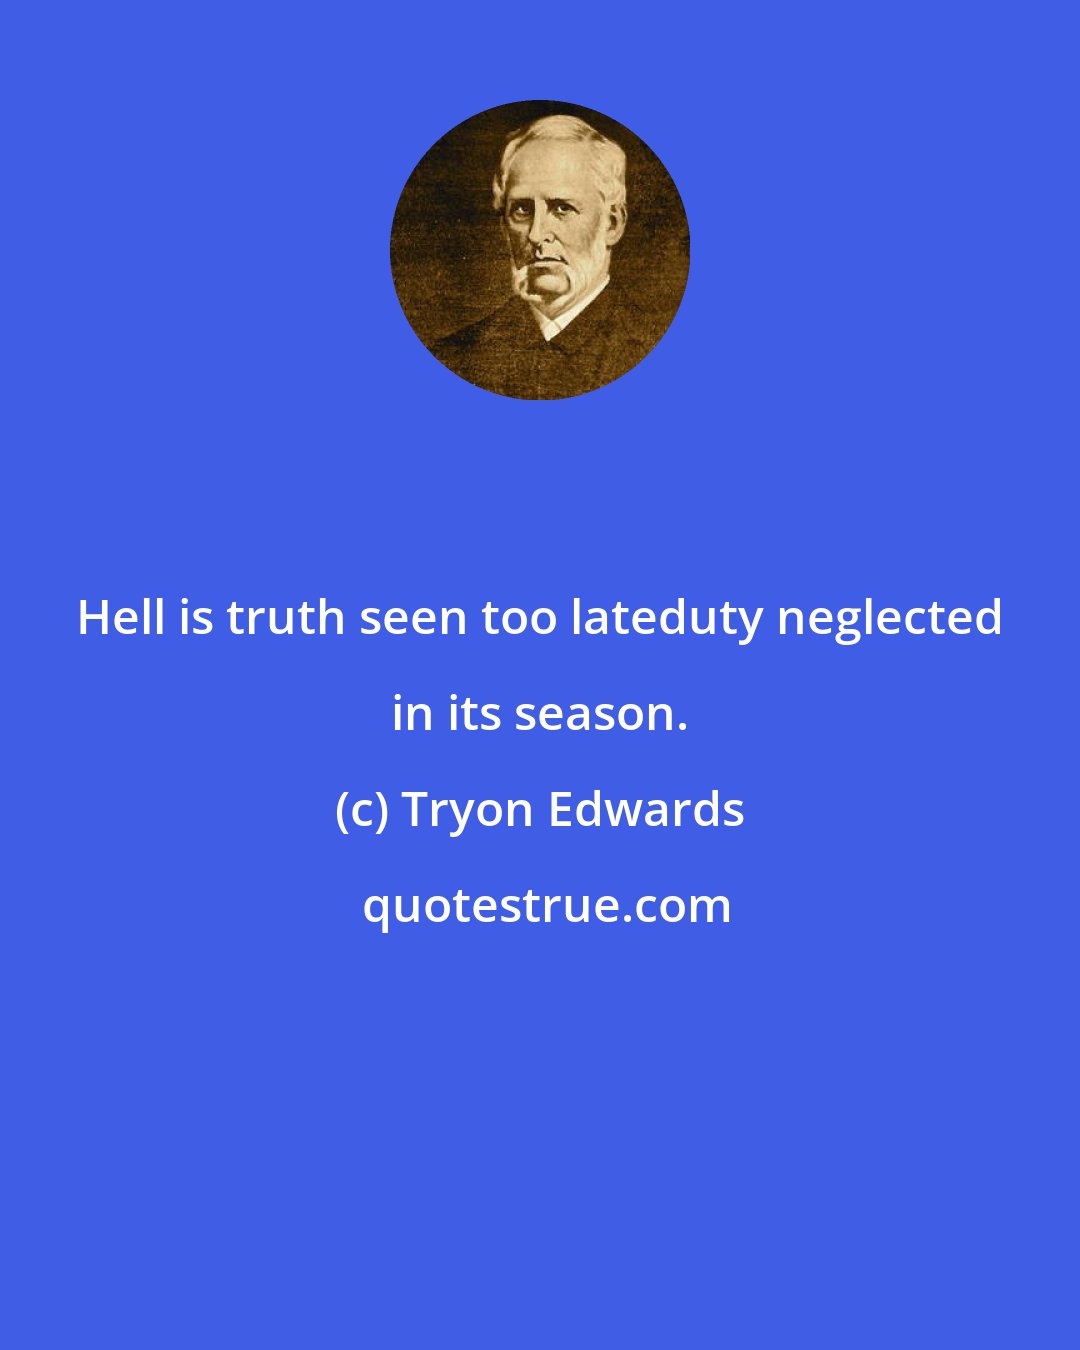 Tryon Edwards: Hell is truth seen too lateduty neglected in its season.